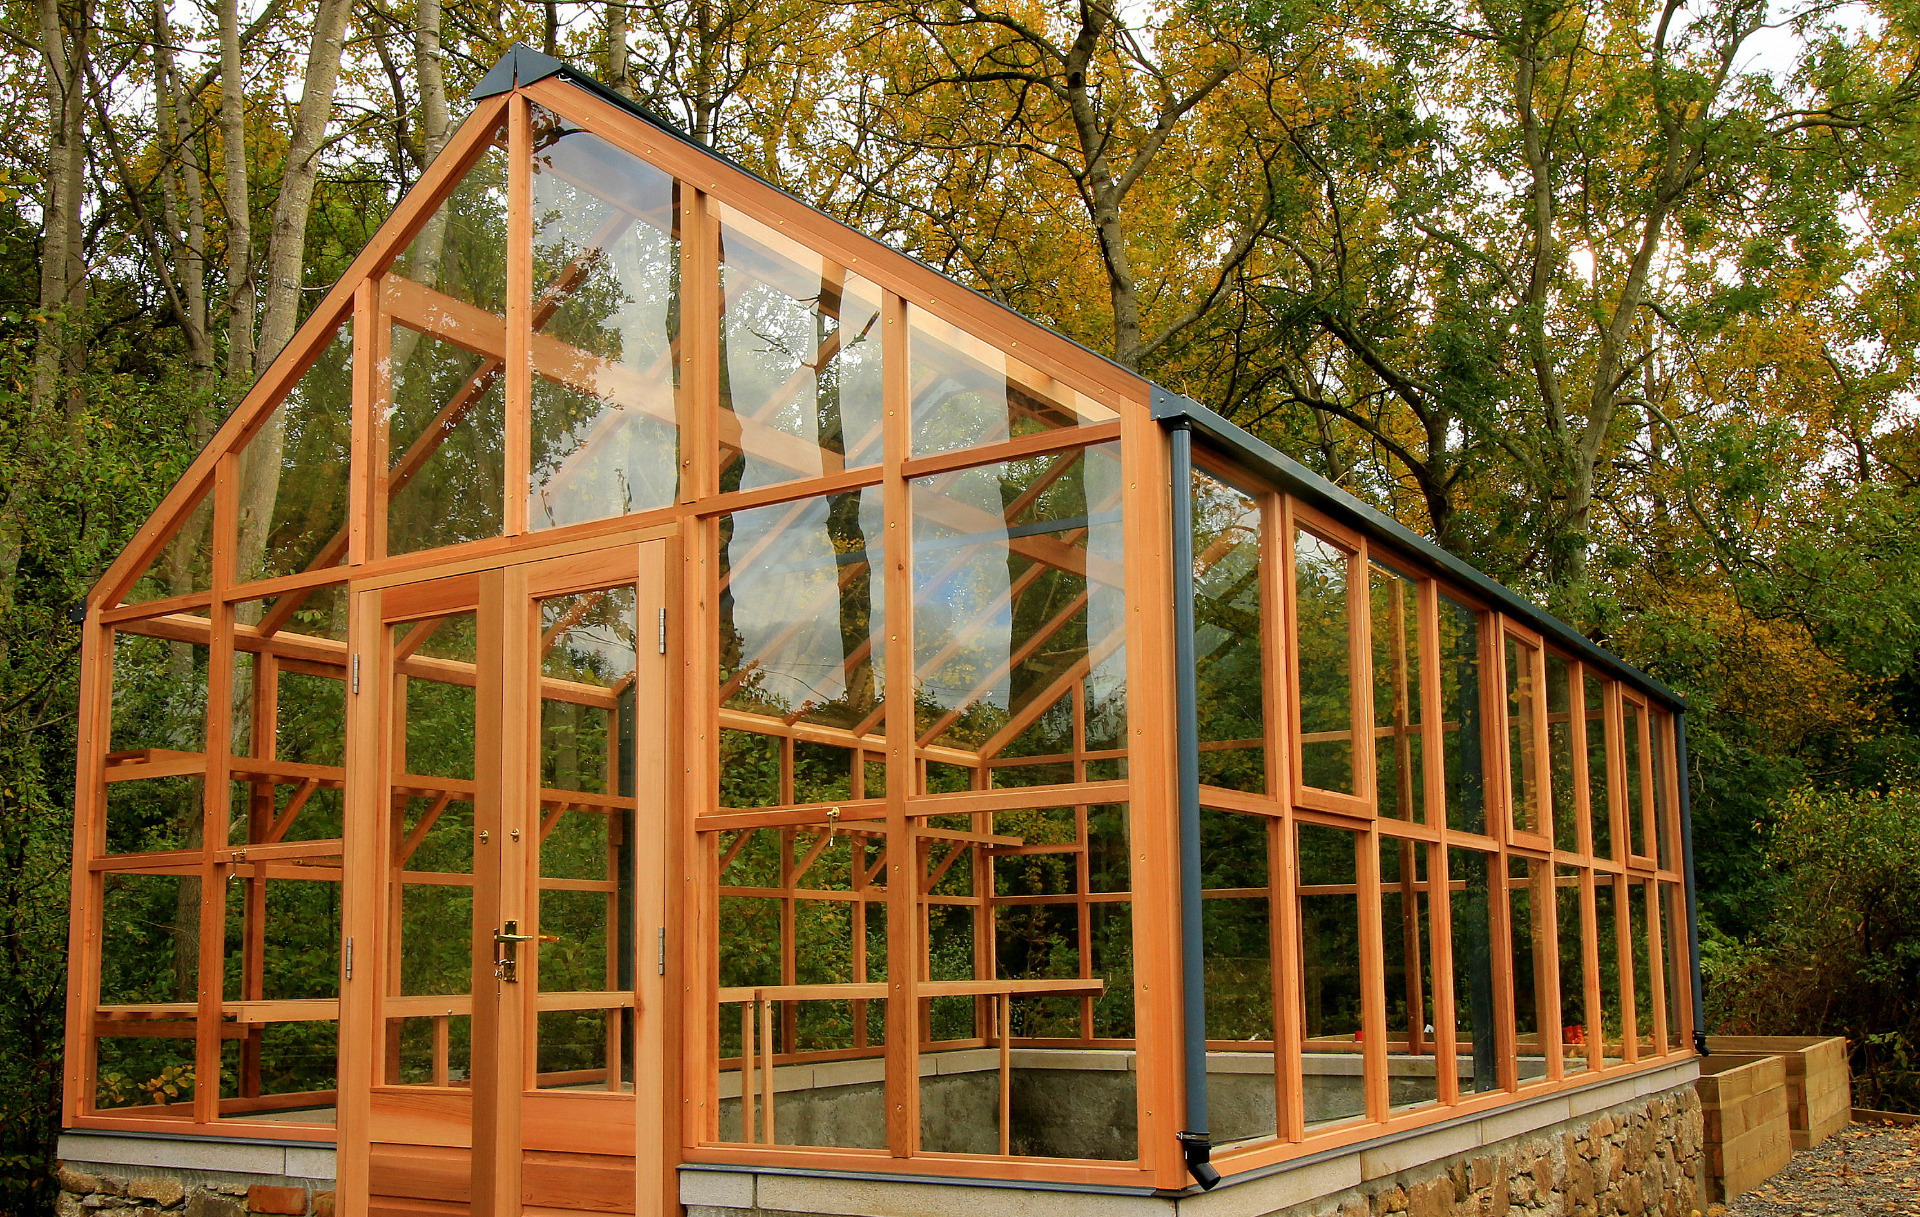 An outstanding Classic Timber Greenhouse on a stone wall